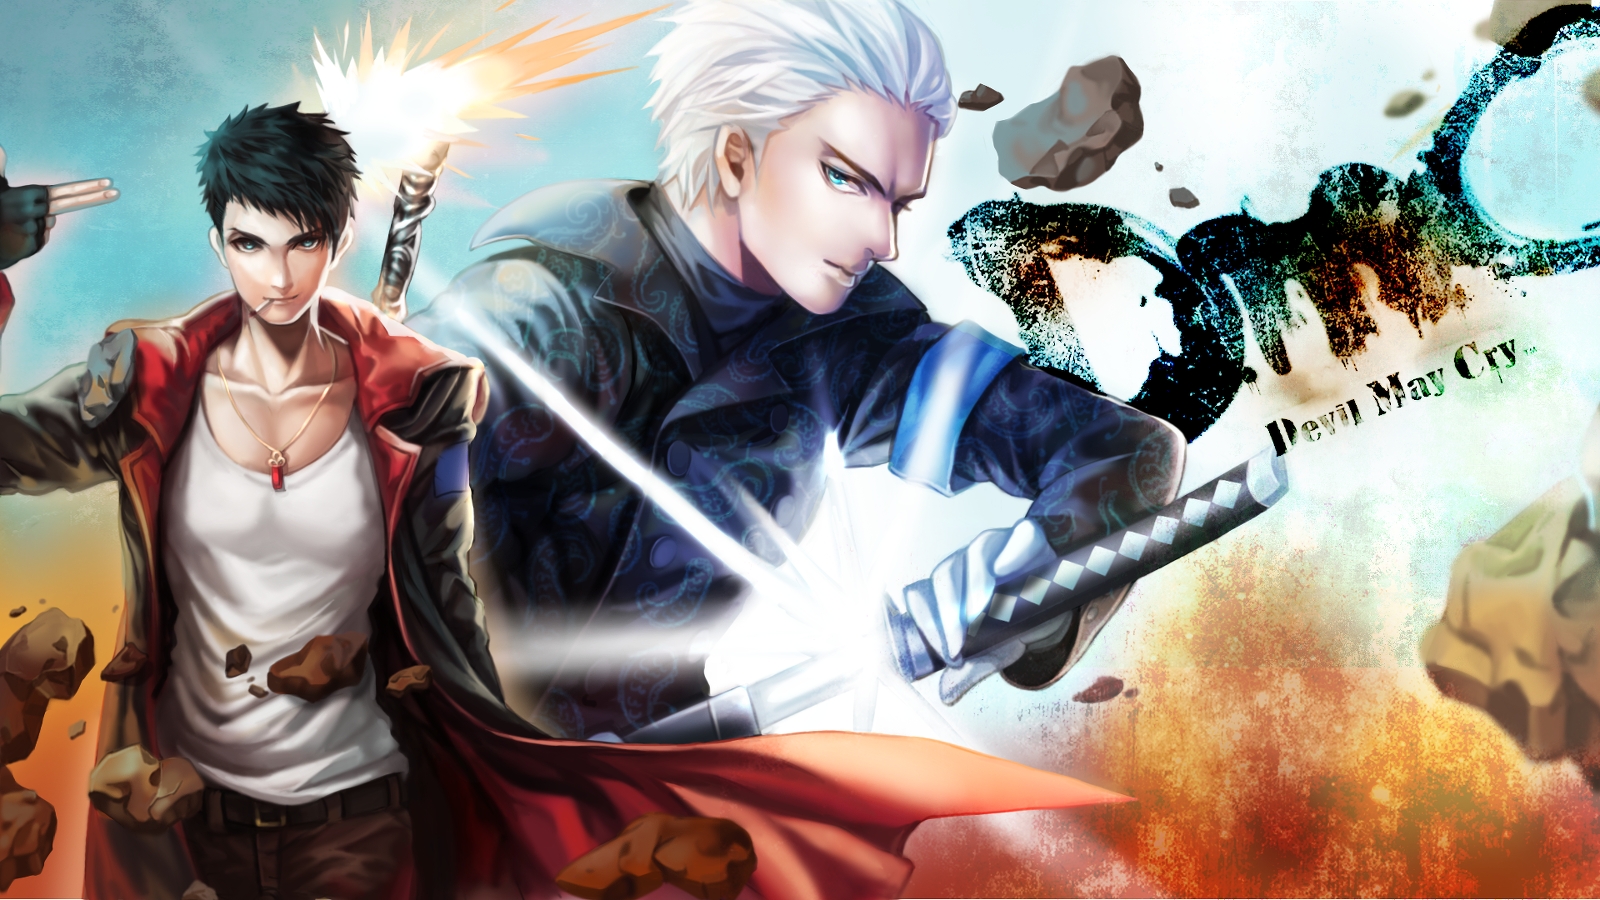 download dmc devil may cry